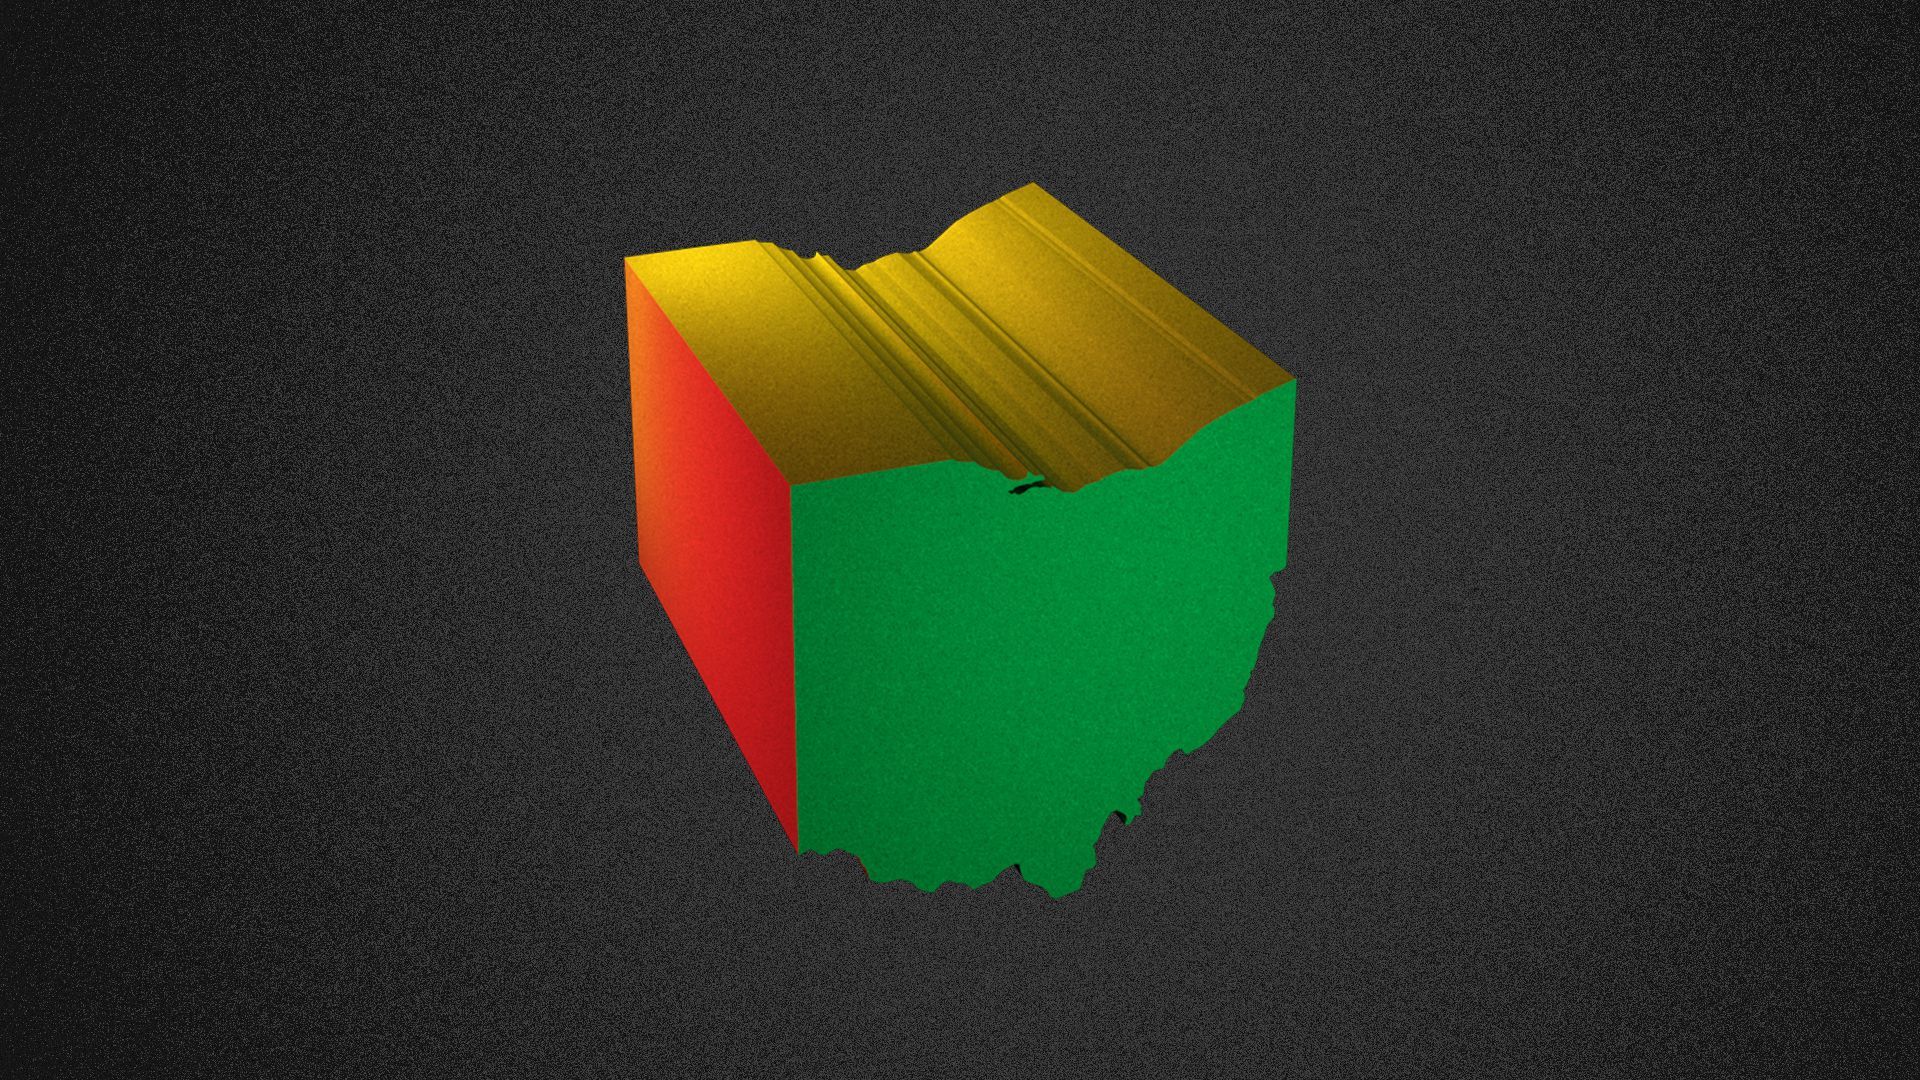 Illustration of the state of Ohio lit by red, green and yellow lights.